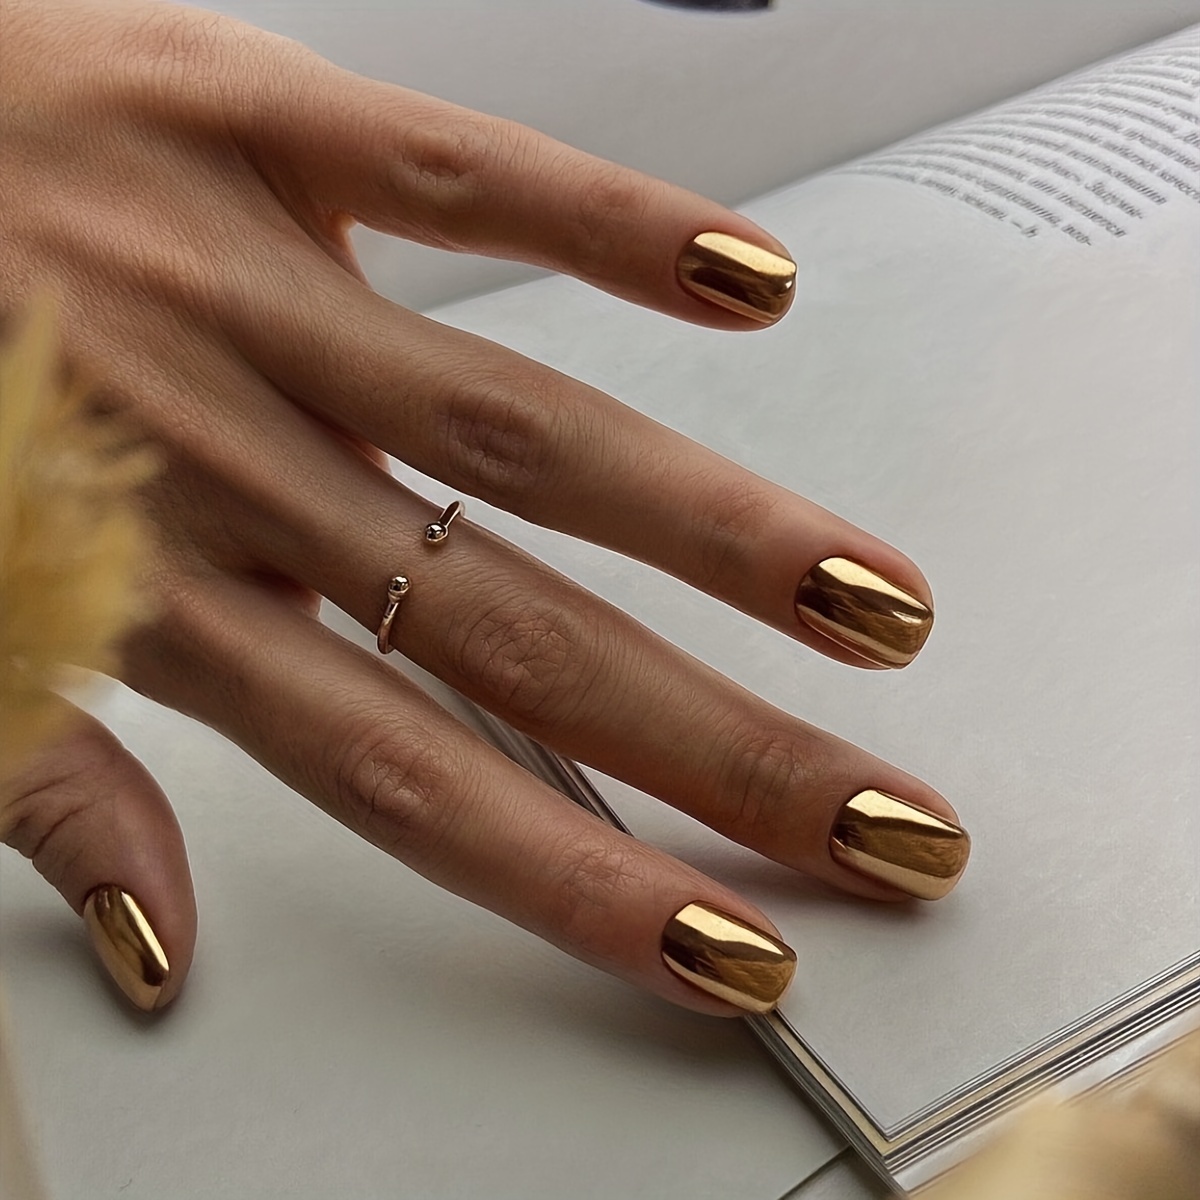 Gold Chrome and Glitters  Gold nails, Golden nails designs, Golden nails